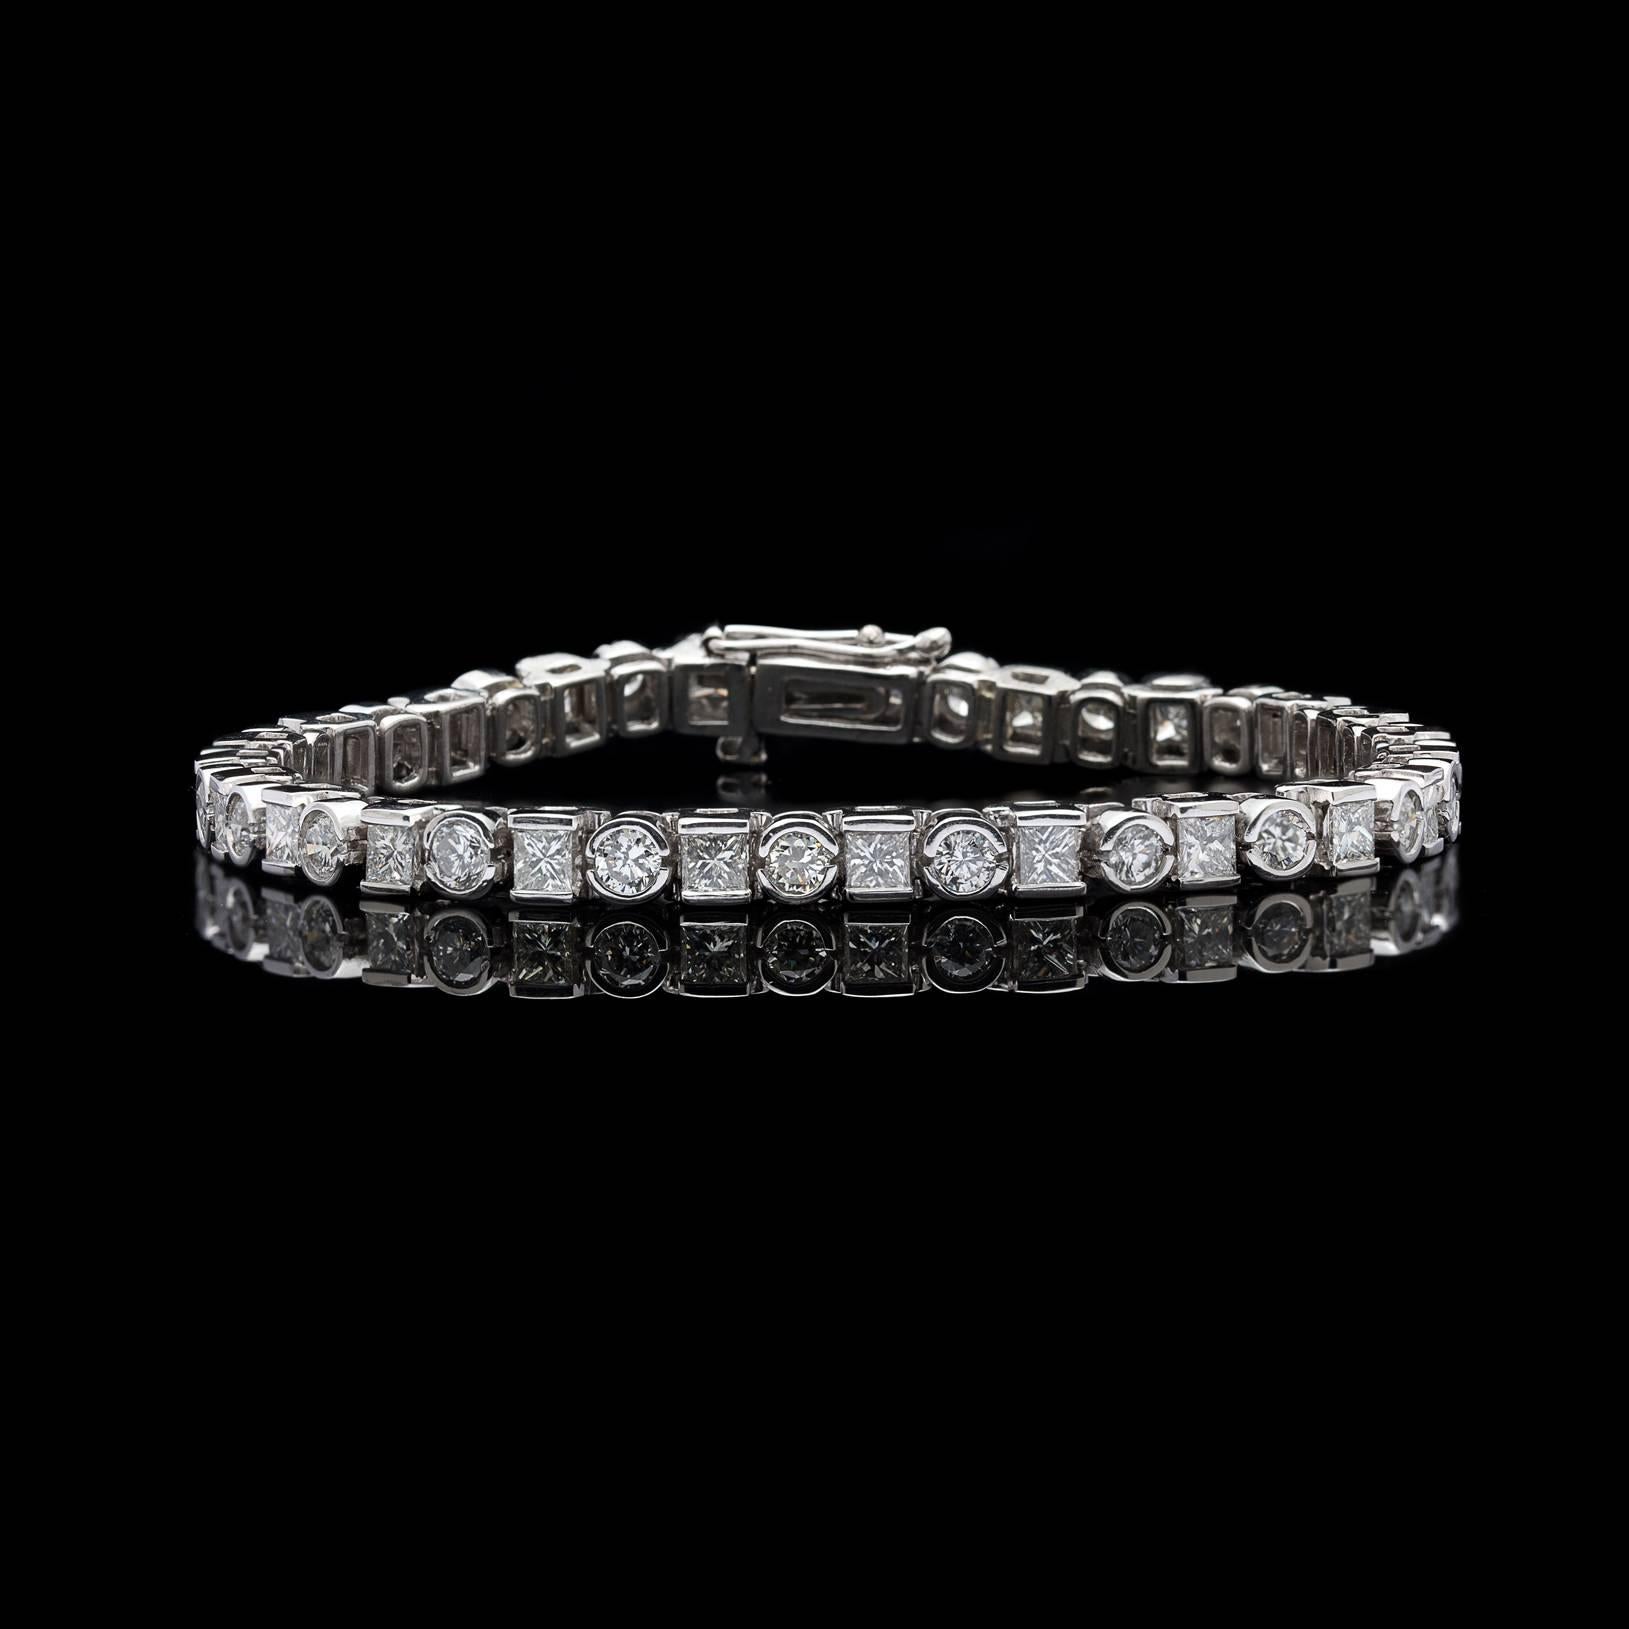 The perfect mix of round and princess cut diamonds come together to form one stunning piece in this gorgeous platinum line bracelet. At 9.20 carats total diamond weight, there is no lack of sparkle in this elegant piece. The 46 alternating shaped